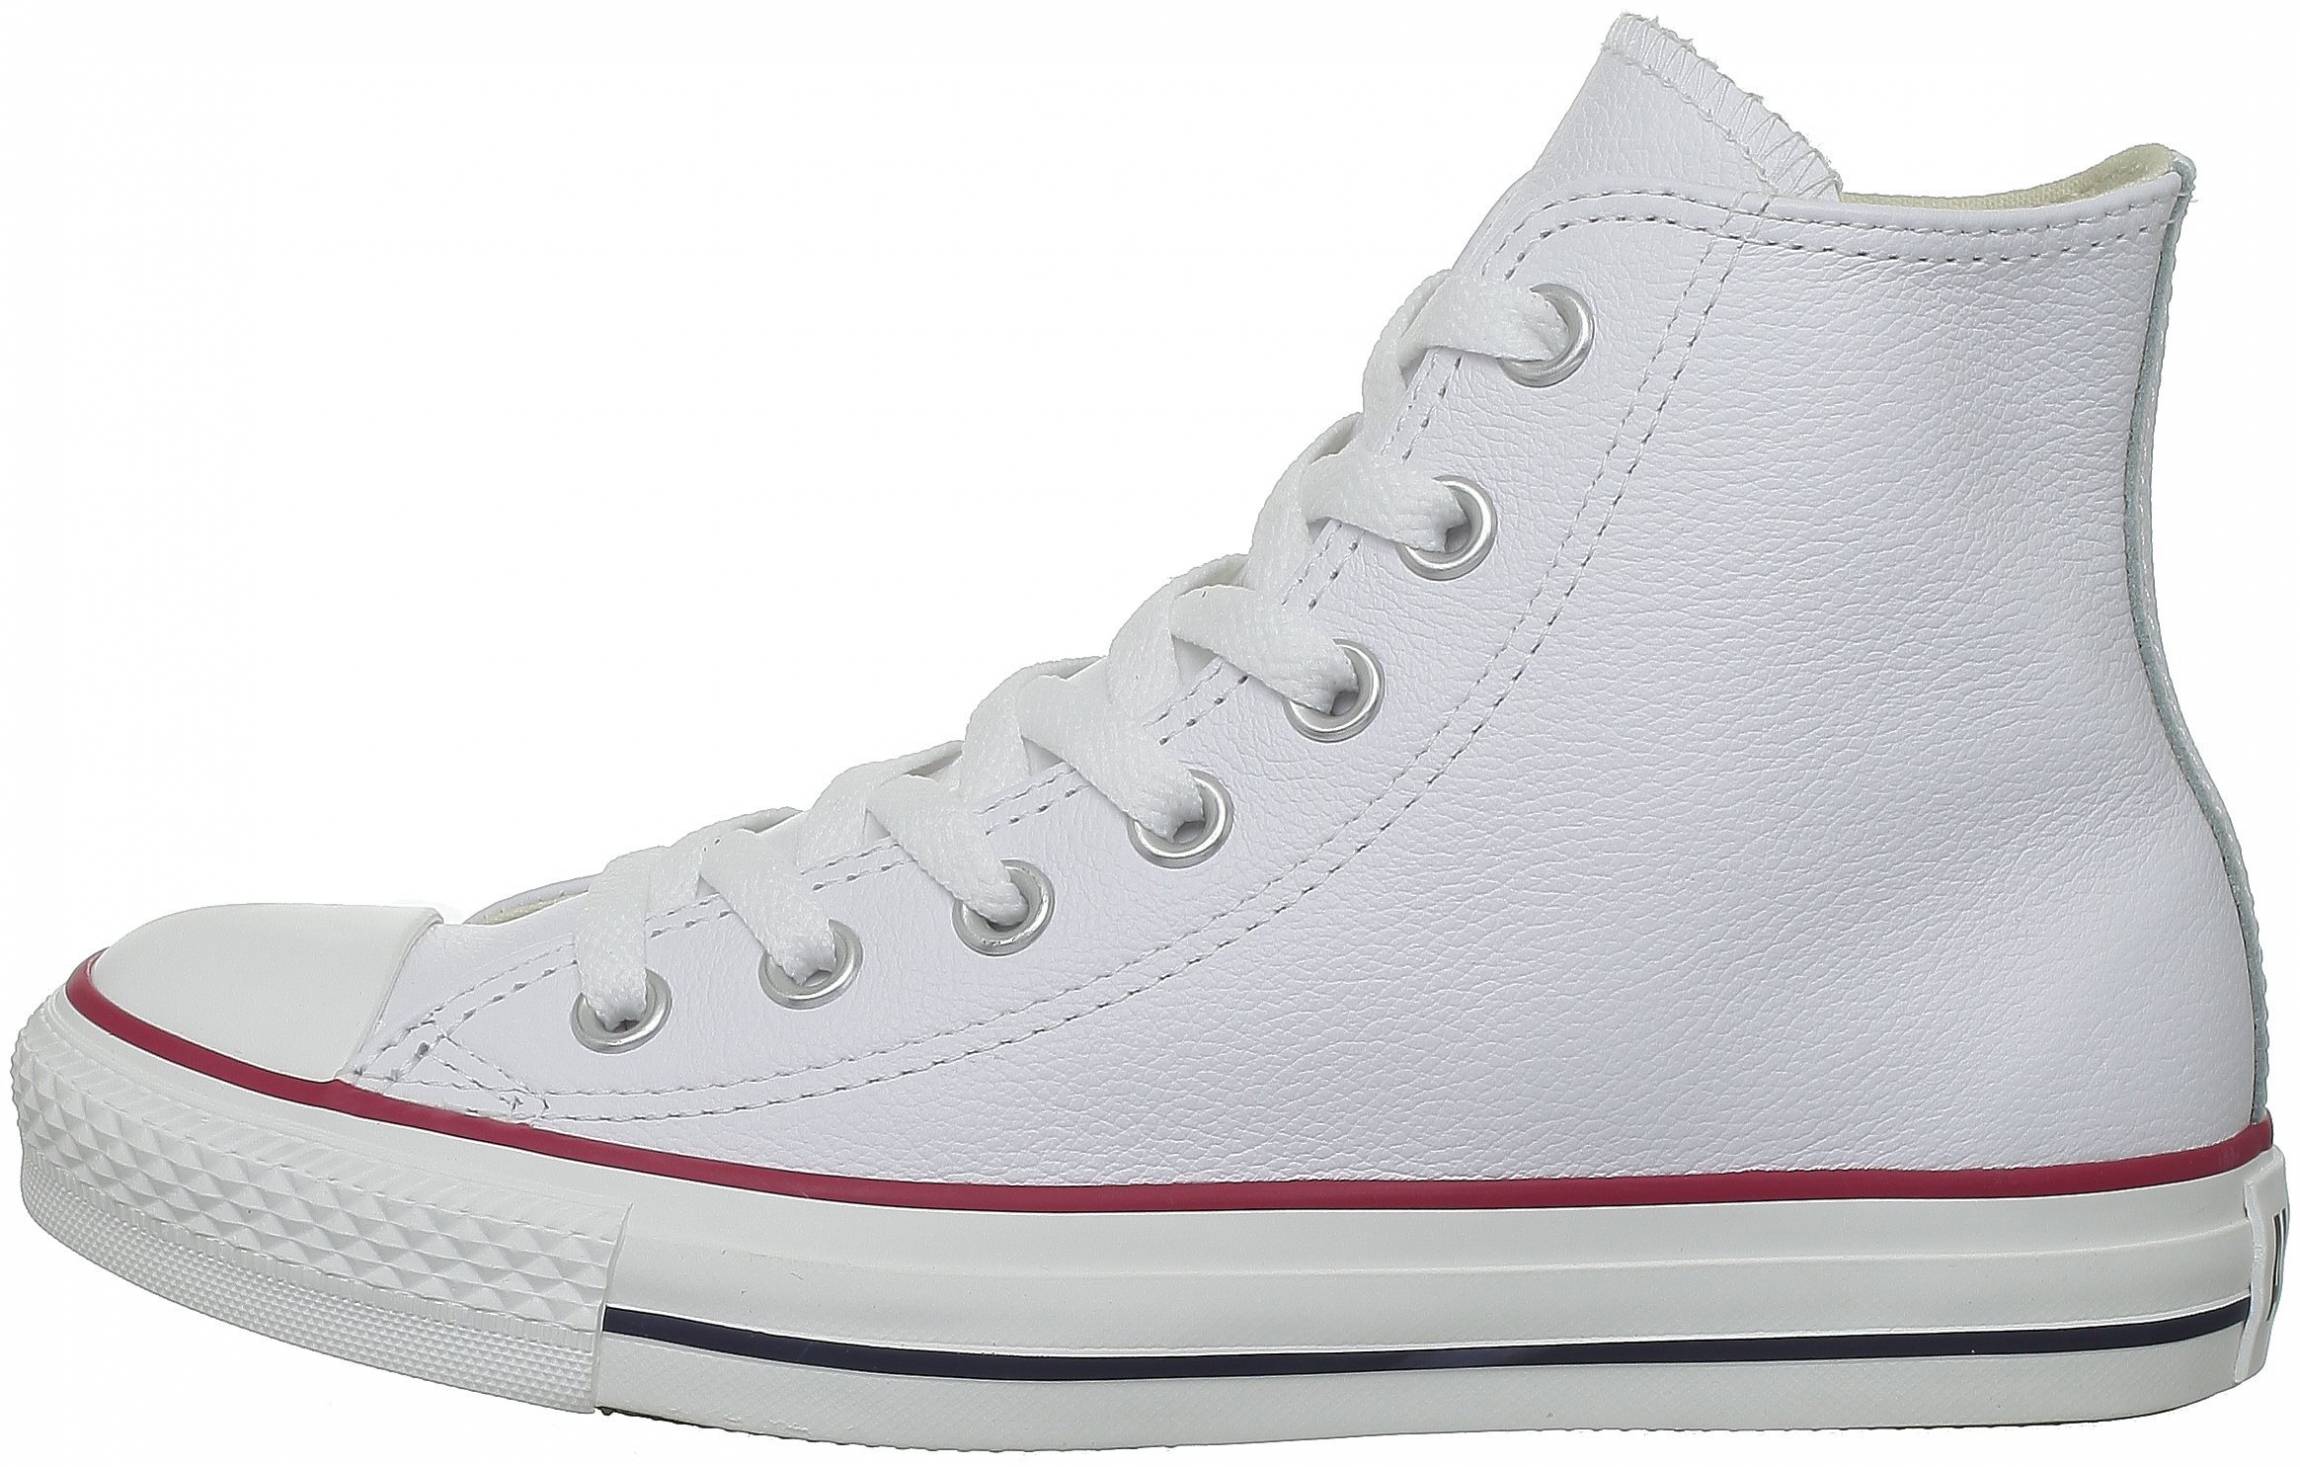 Only $47 + Review of Converse Chuck 